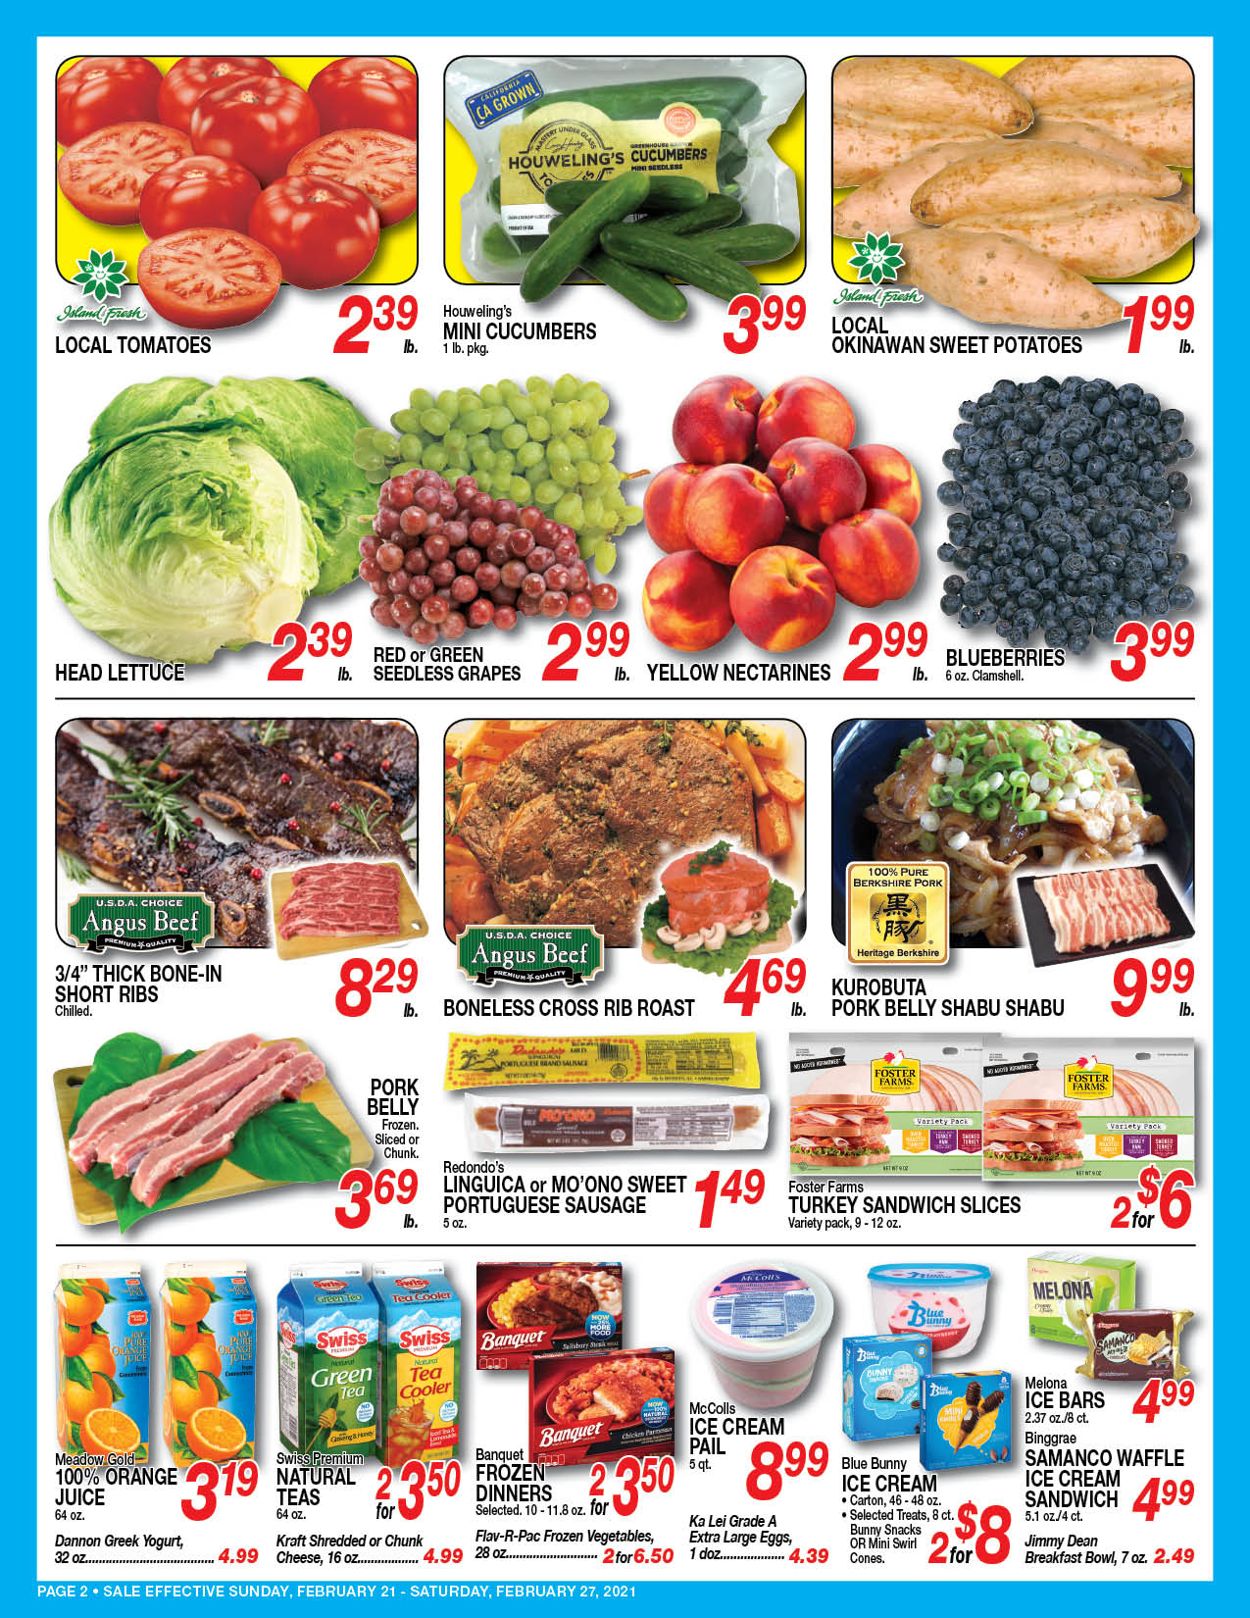 Catalogue Don Quijote Hawaii from 02/21/2021